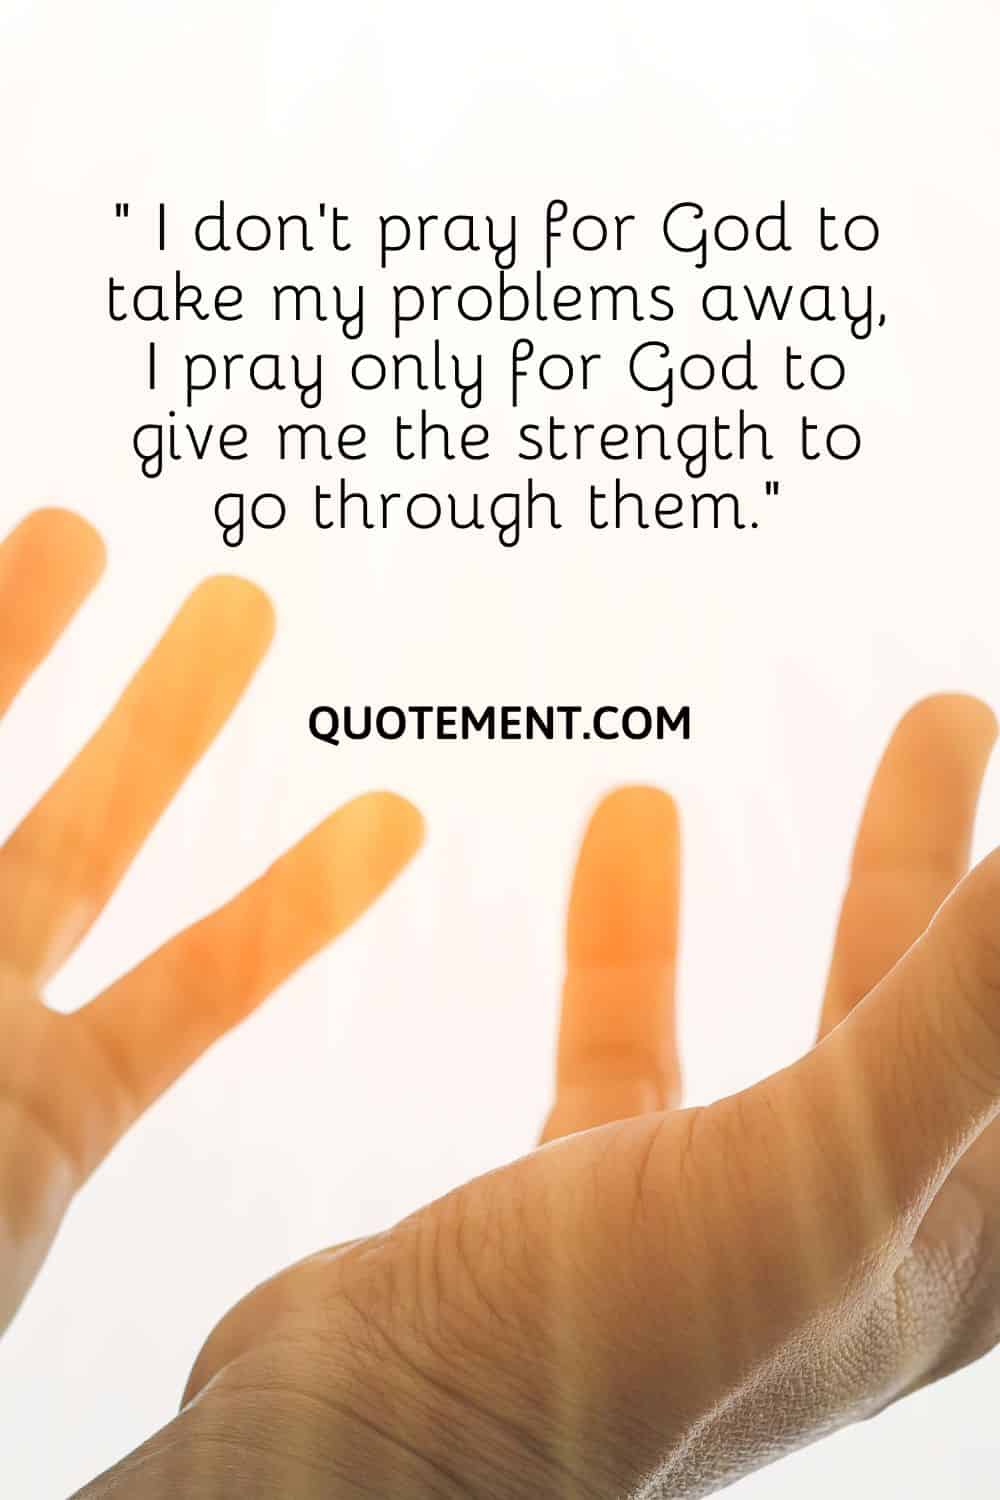 I don't pray for God to take my problems away, I pray only for God to give me the strength to go through them.”